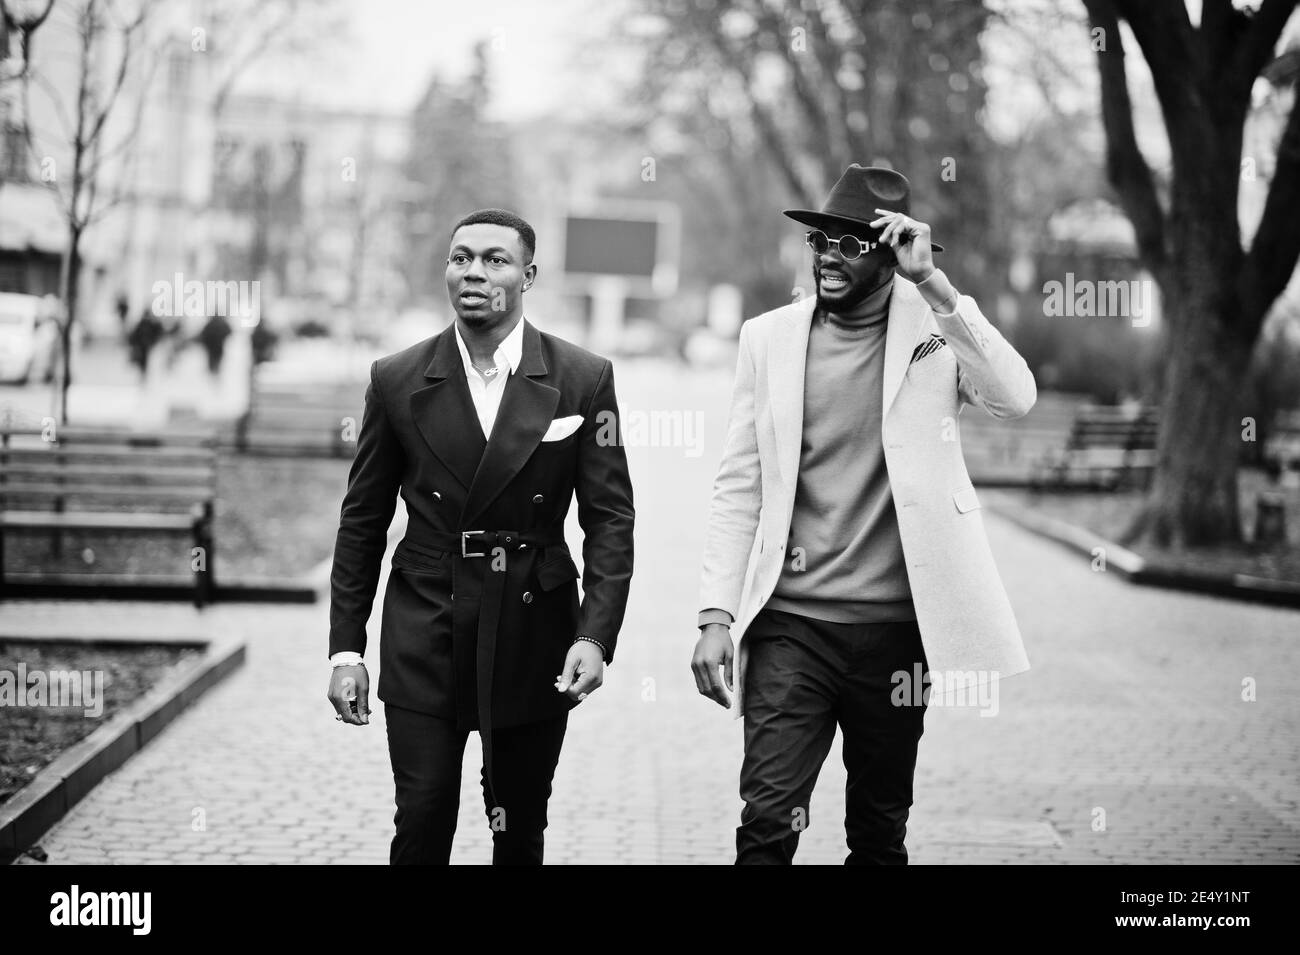 Two fashion black men walking on street. Fashionable portrait of african american male models. Wear suit, coat and hat. Stock Photo